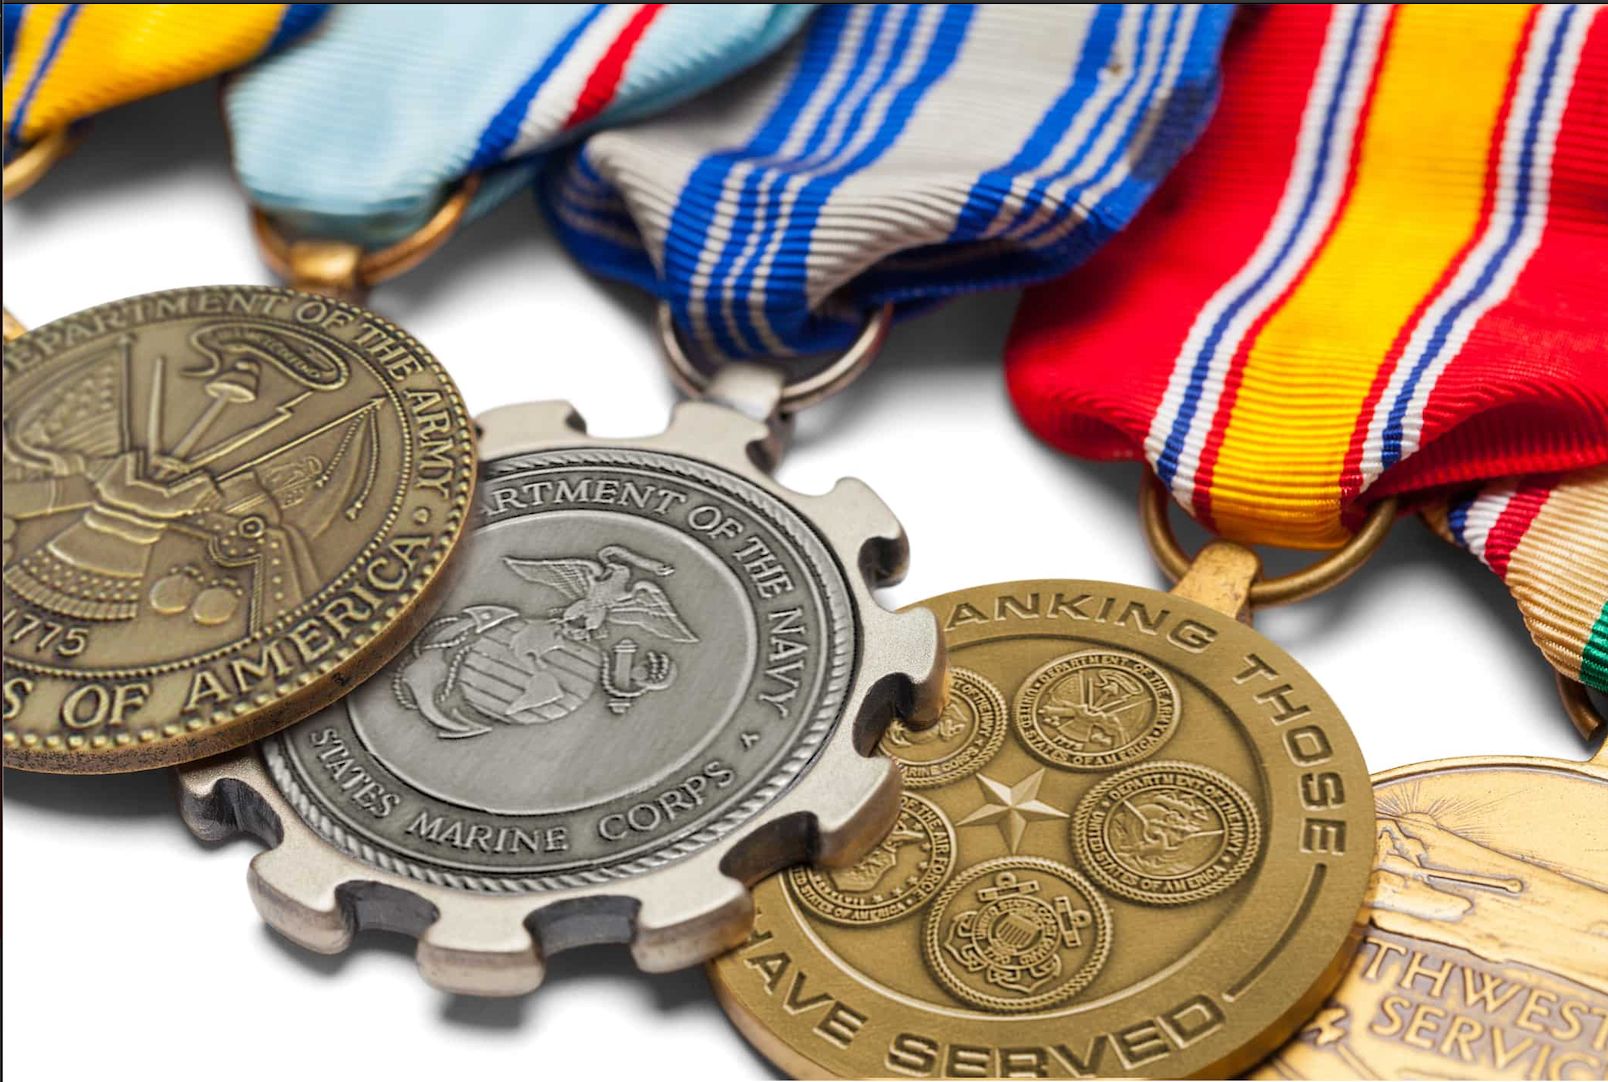 A row of custom stamped medals